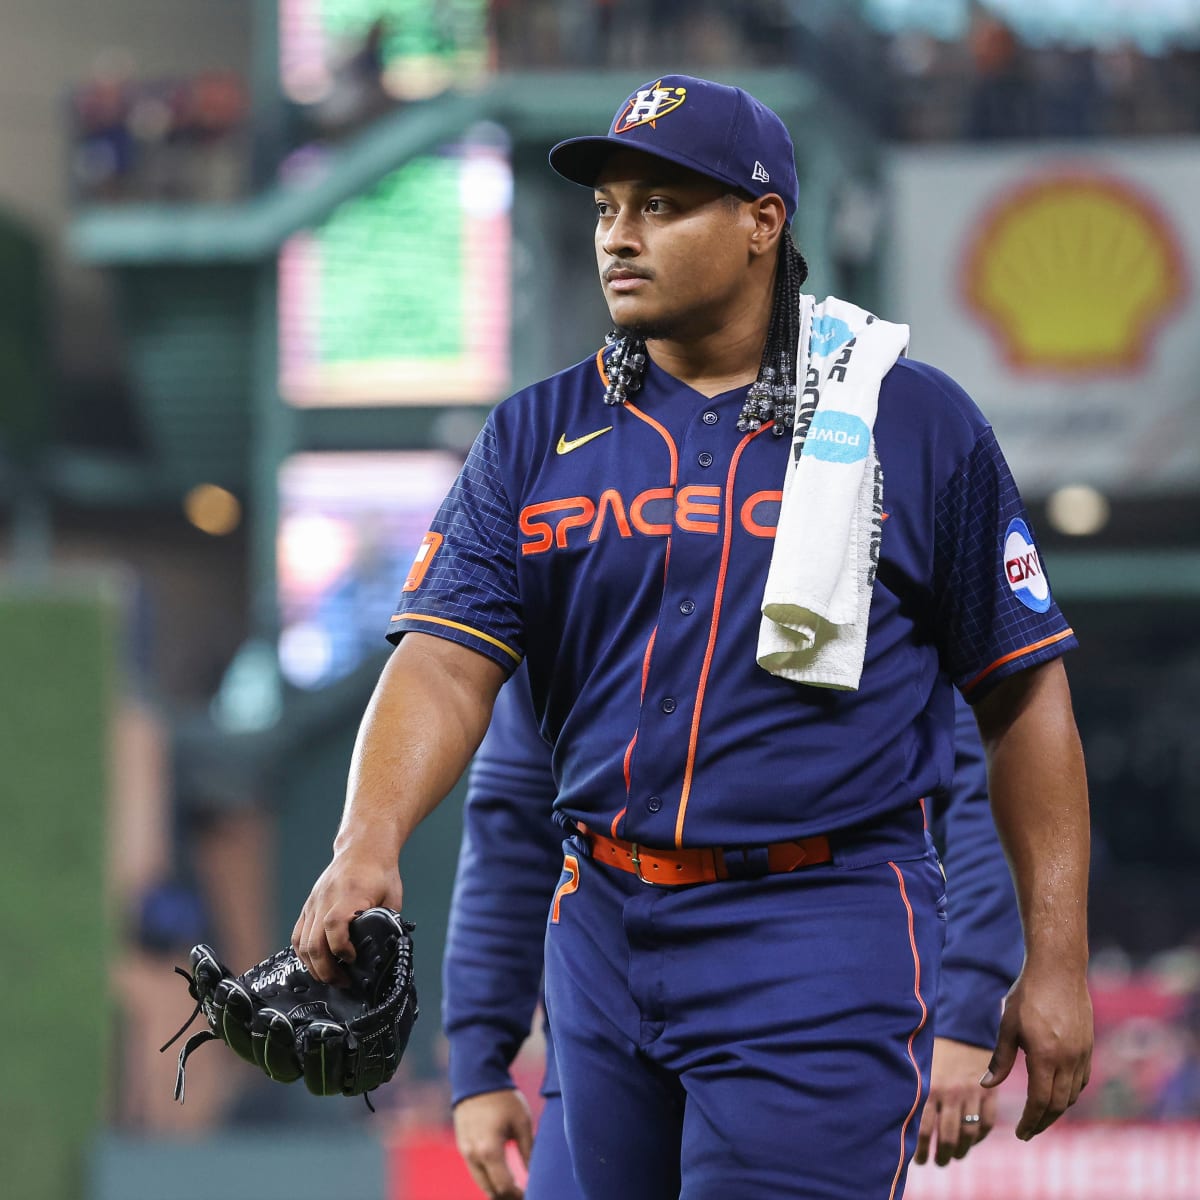 Astros: Concerning stats show Houston rotation could be in trouble